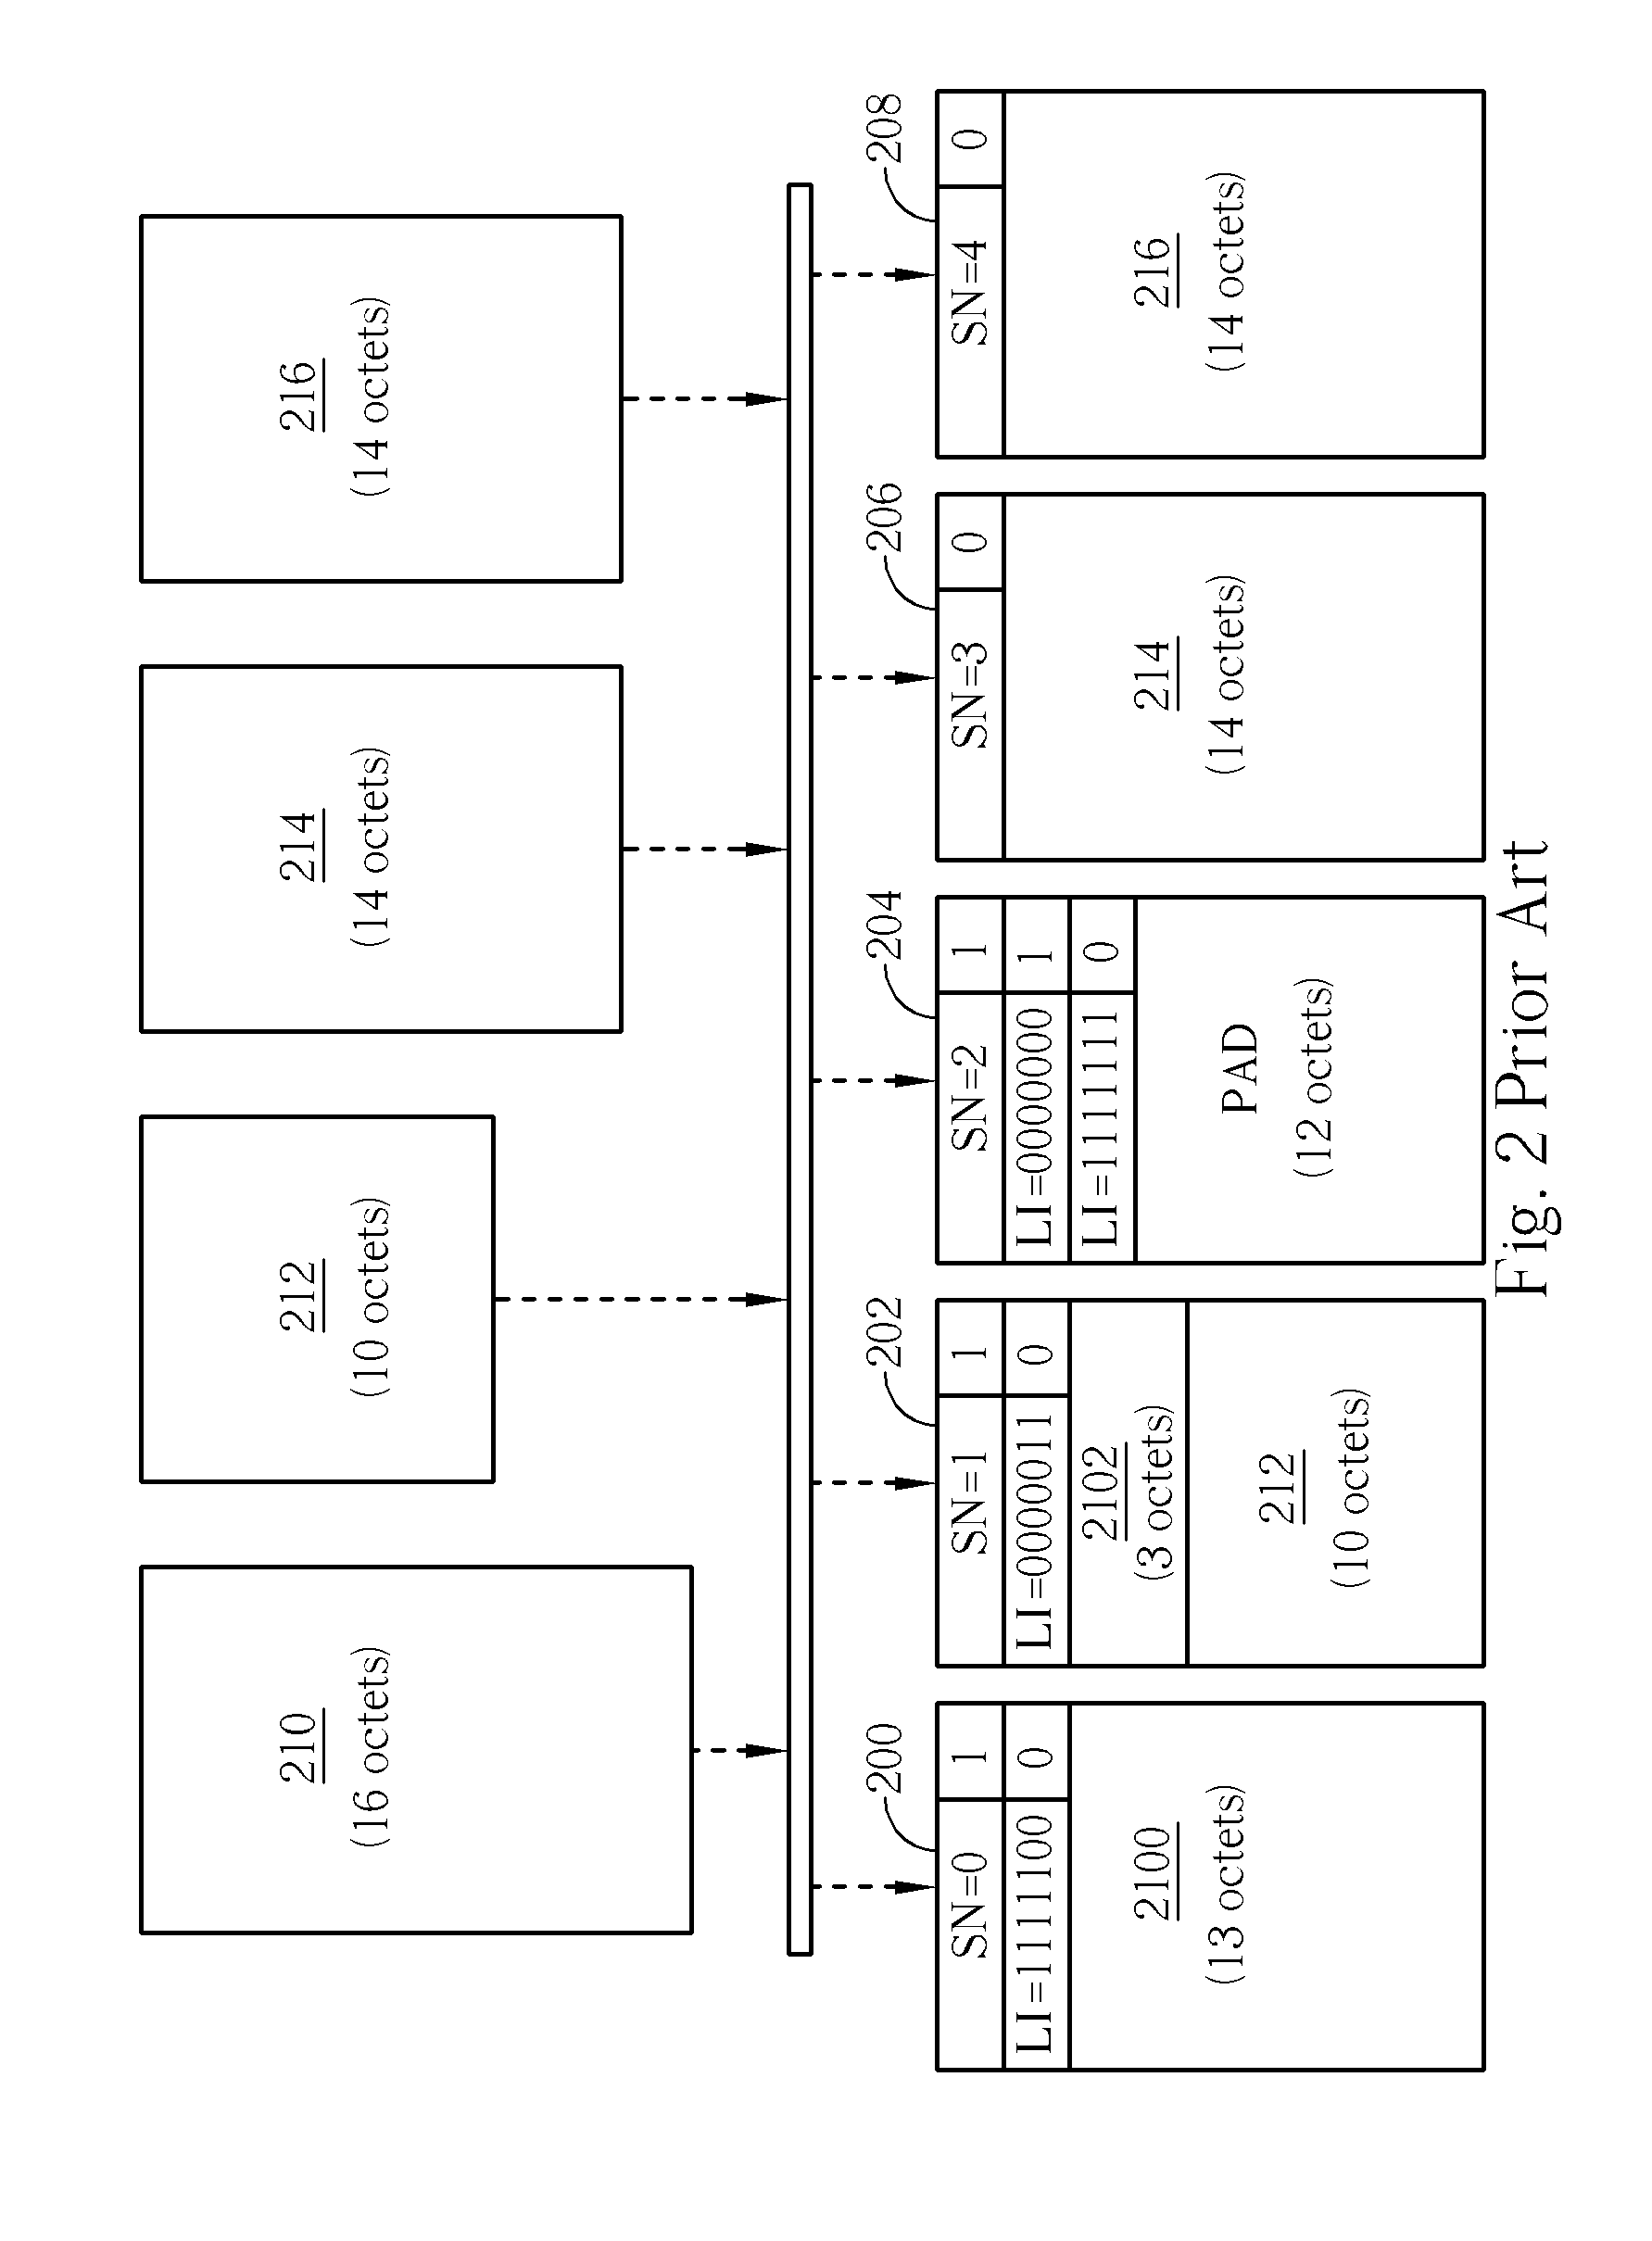 Method and Apparatus of Data Segmentation in a Mobile Communications System